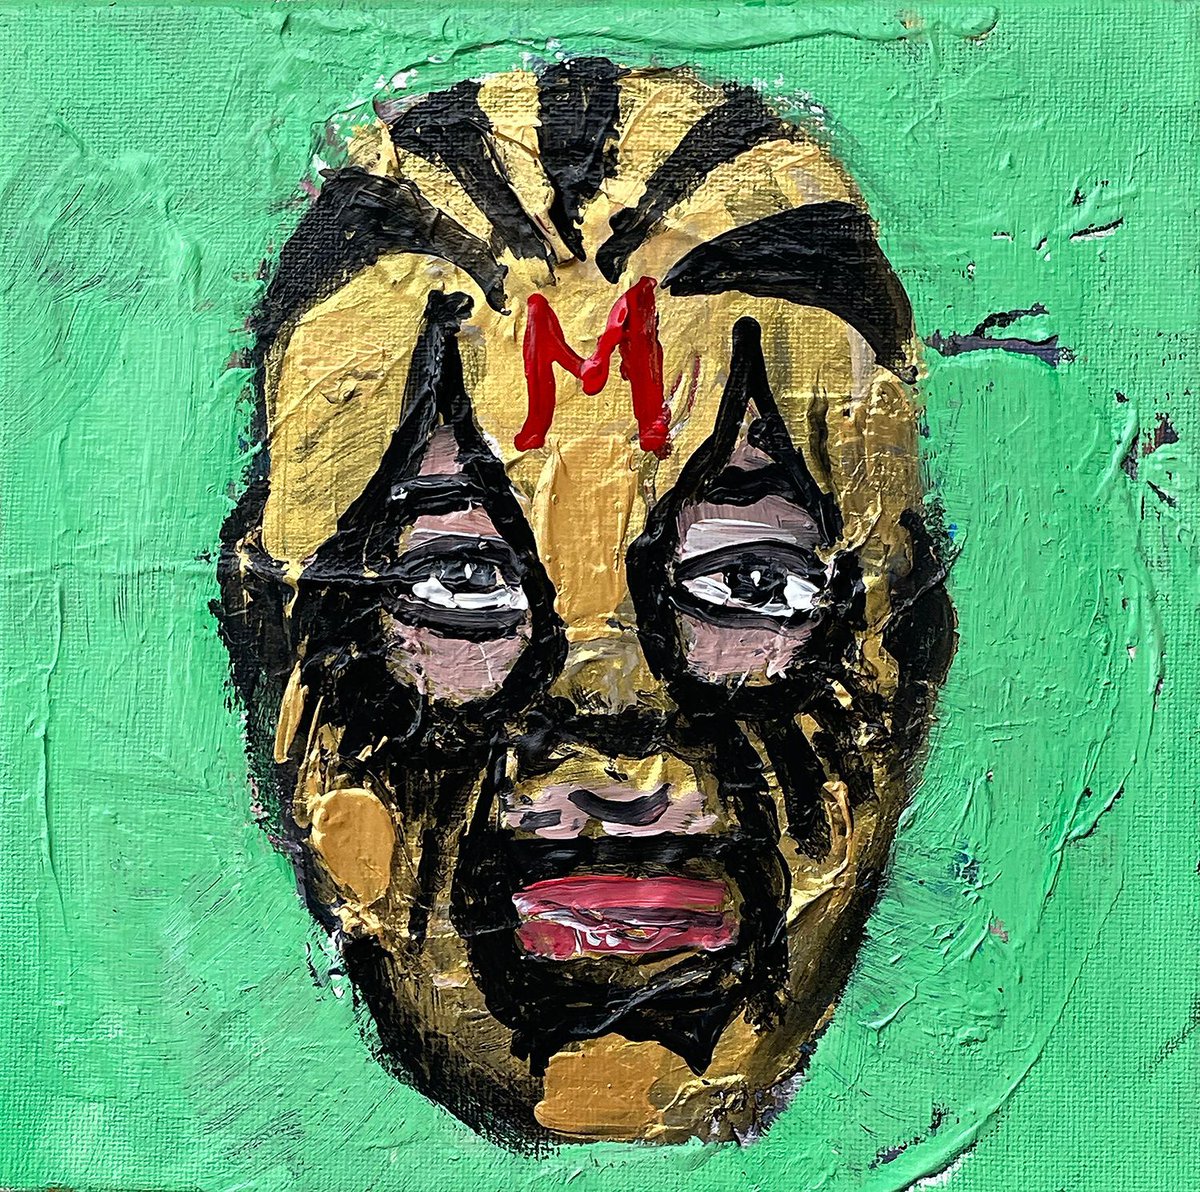 🎭 Mil Máscaras = Wrestling Icon. Known for his vibrant masks & being part of a wrestling dynasty, including WWE star nephew Alberto Del Rio. Born Aaron Rodríguez Arellano, he's a lucha libre trailblazer whose legacy spans continents. #MilMáscaras #LuchaLibreLegend